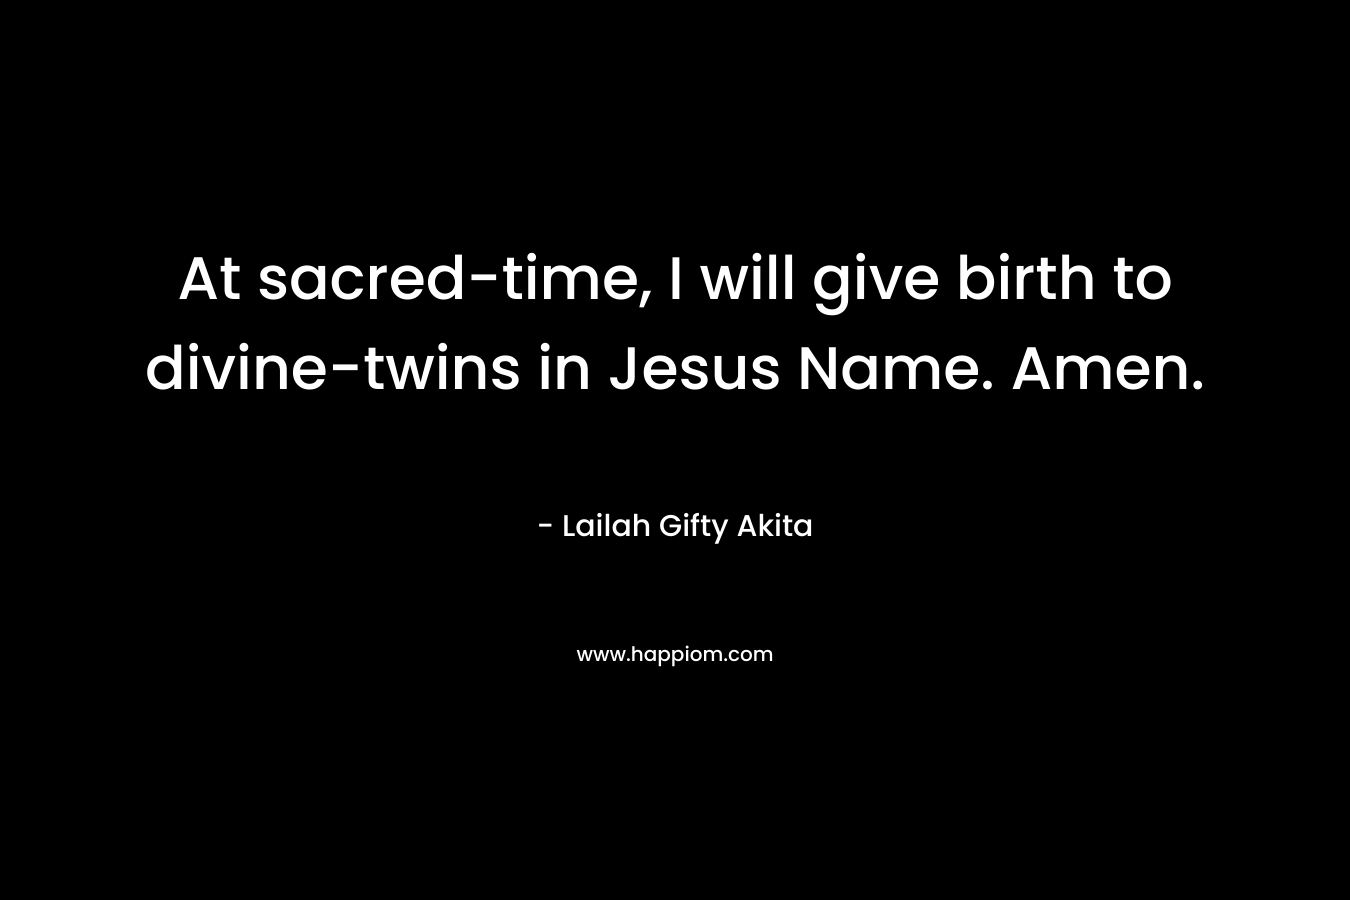 At sacred-time, I will give birth to divine-twins in Jesus Name. Amen.